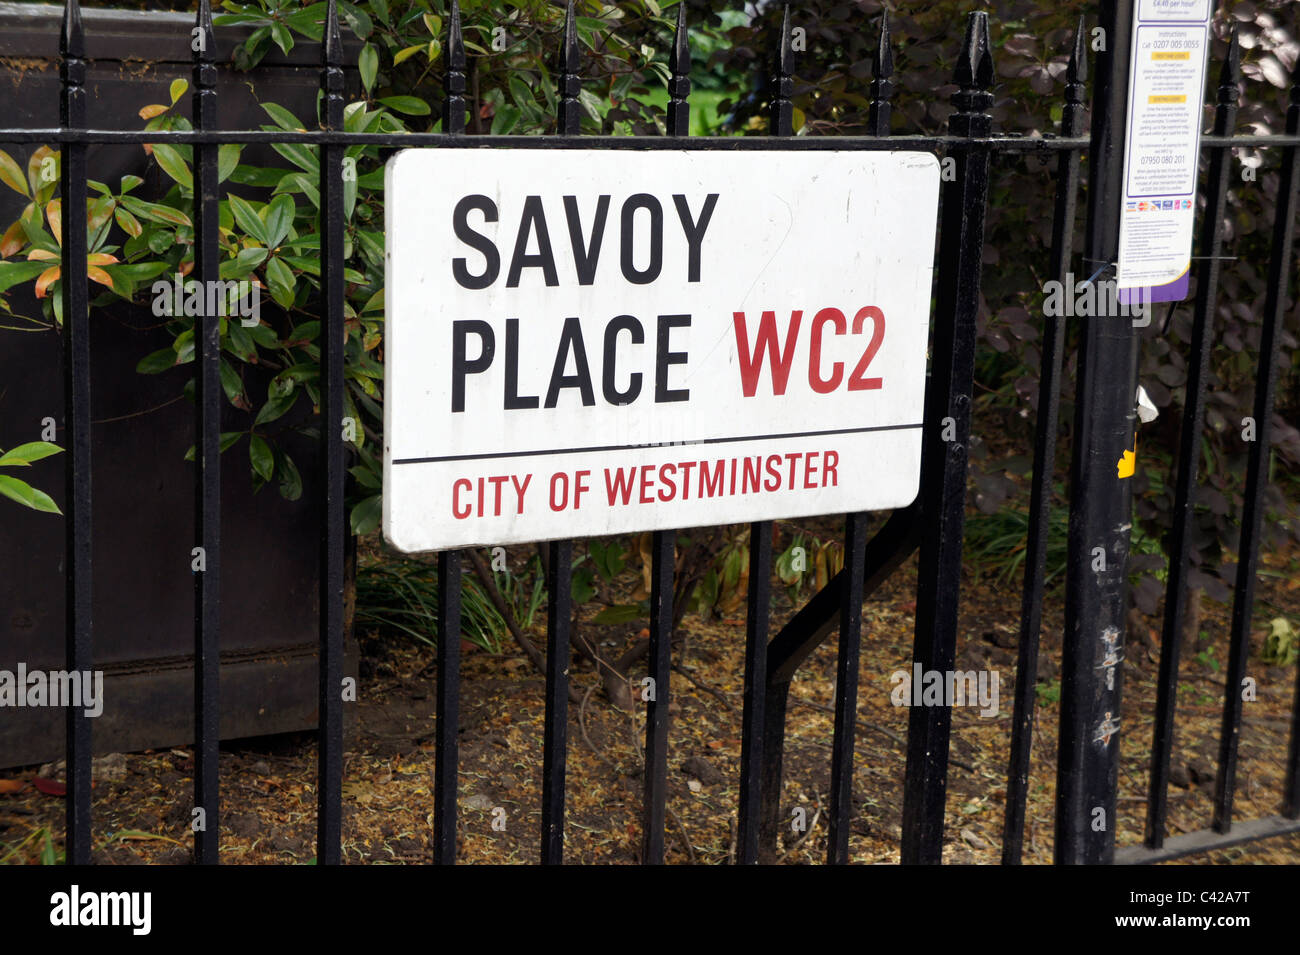 Savoy Place WC2 City of Westminster cartello stradale Foto Stock